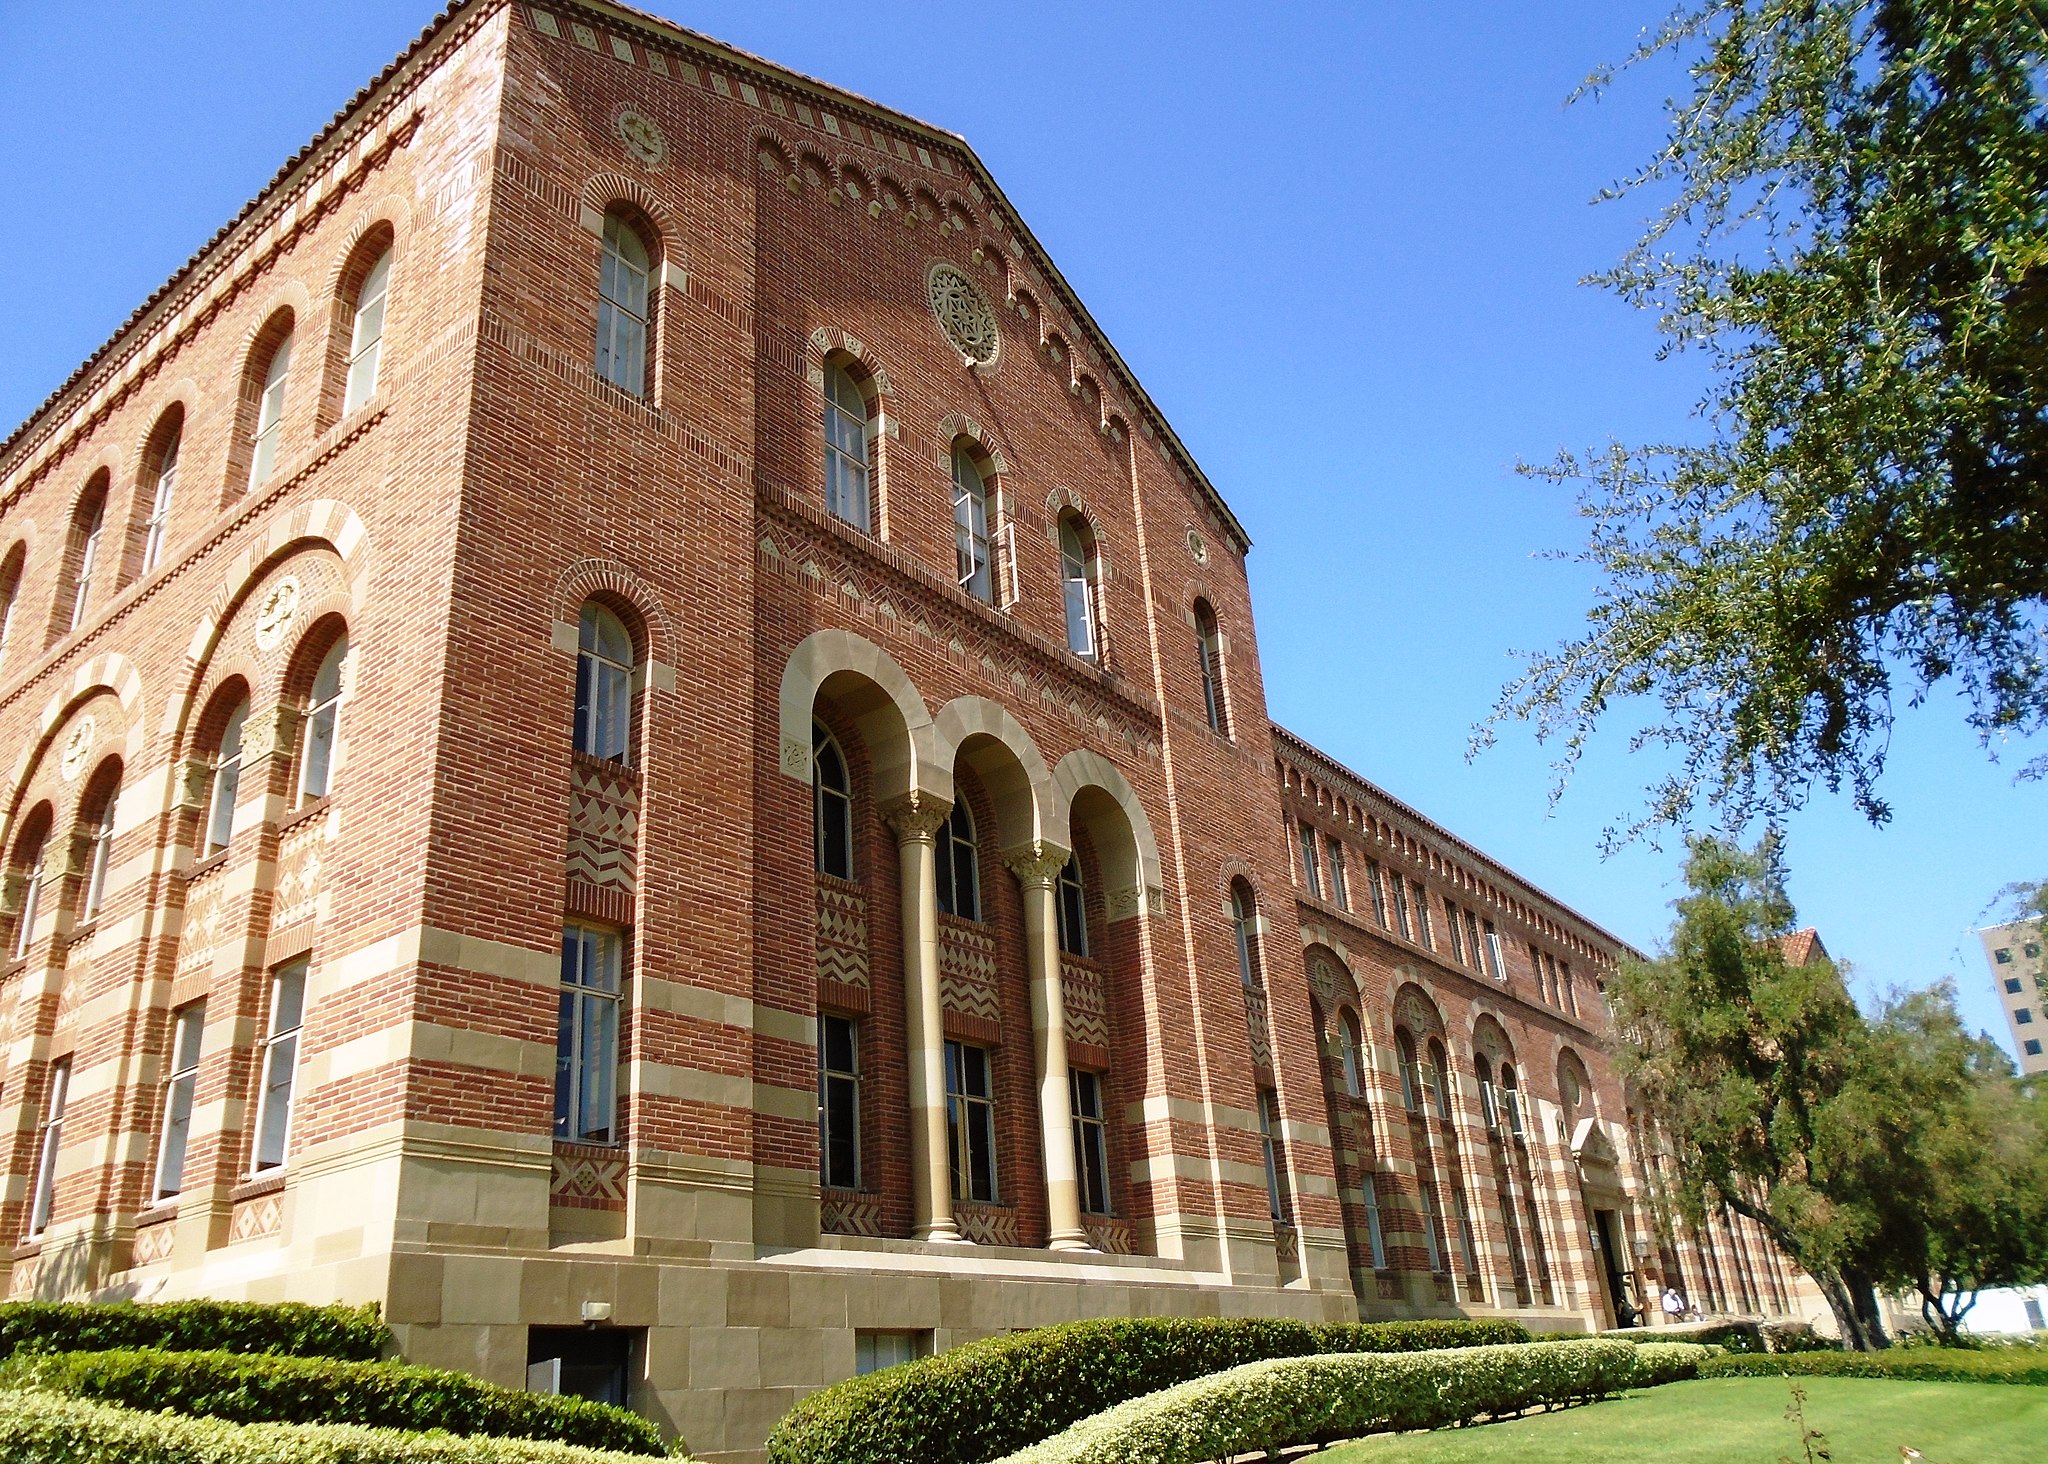 Color photograph of Haines Hall at UCLA, a large red brick building with lots of Romanesque arches